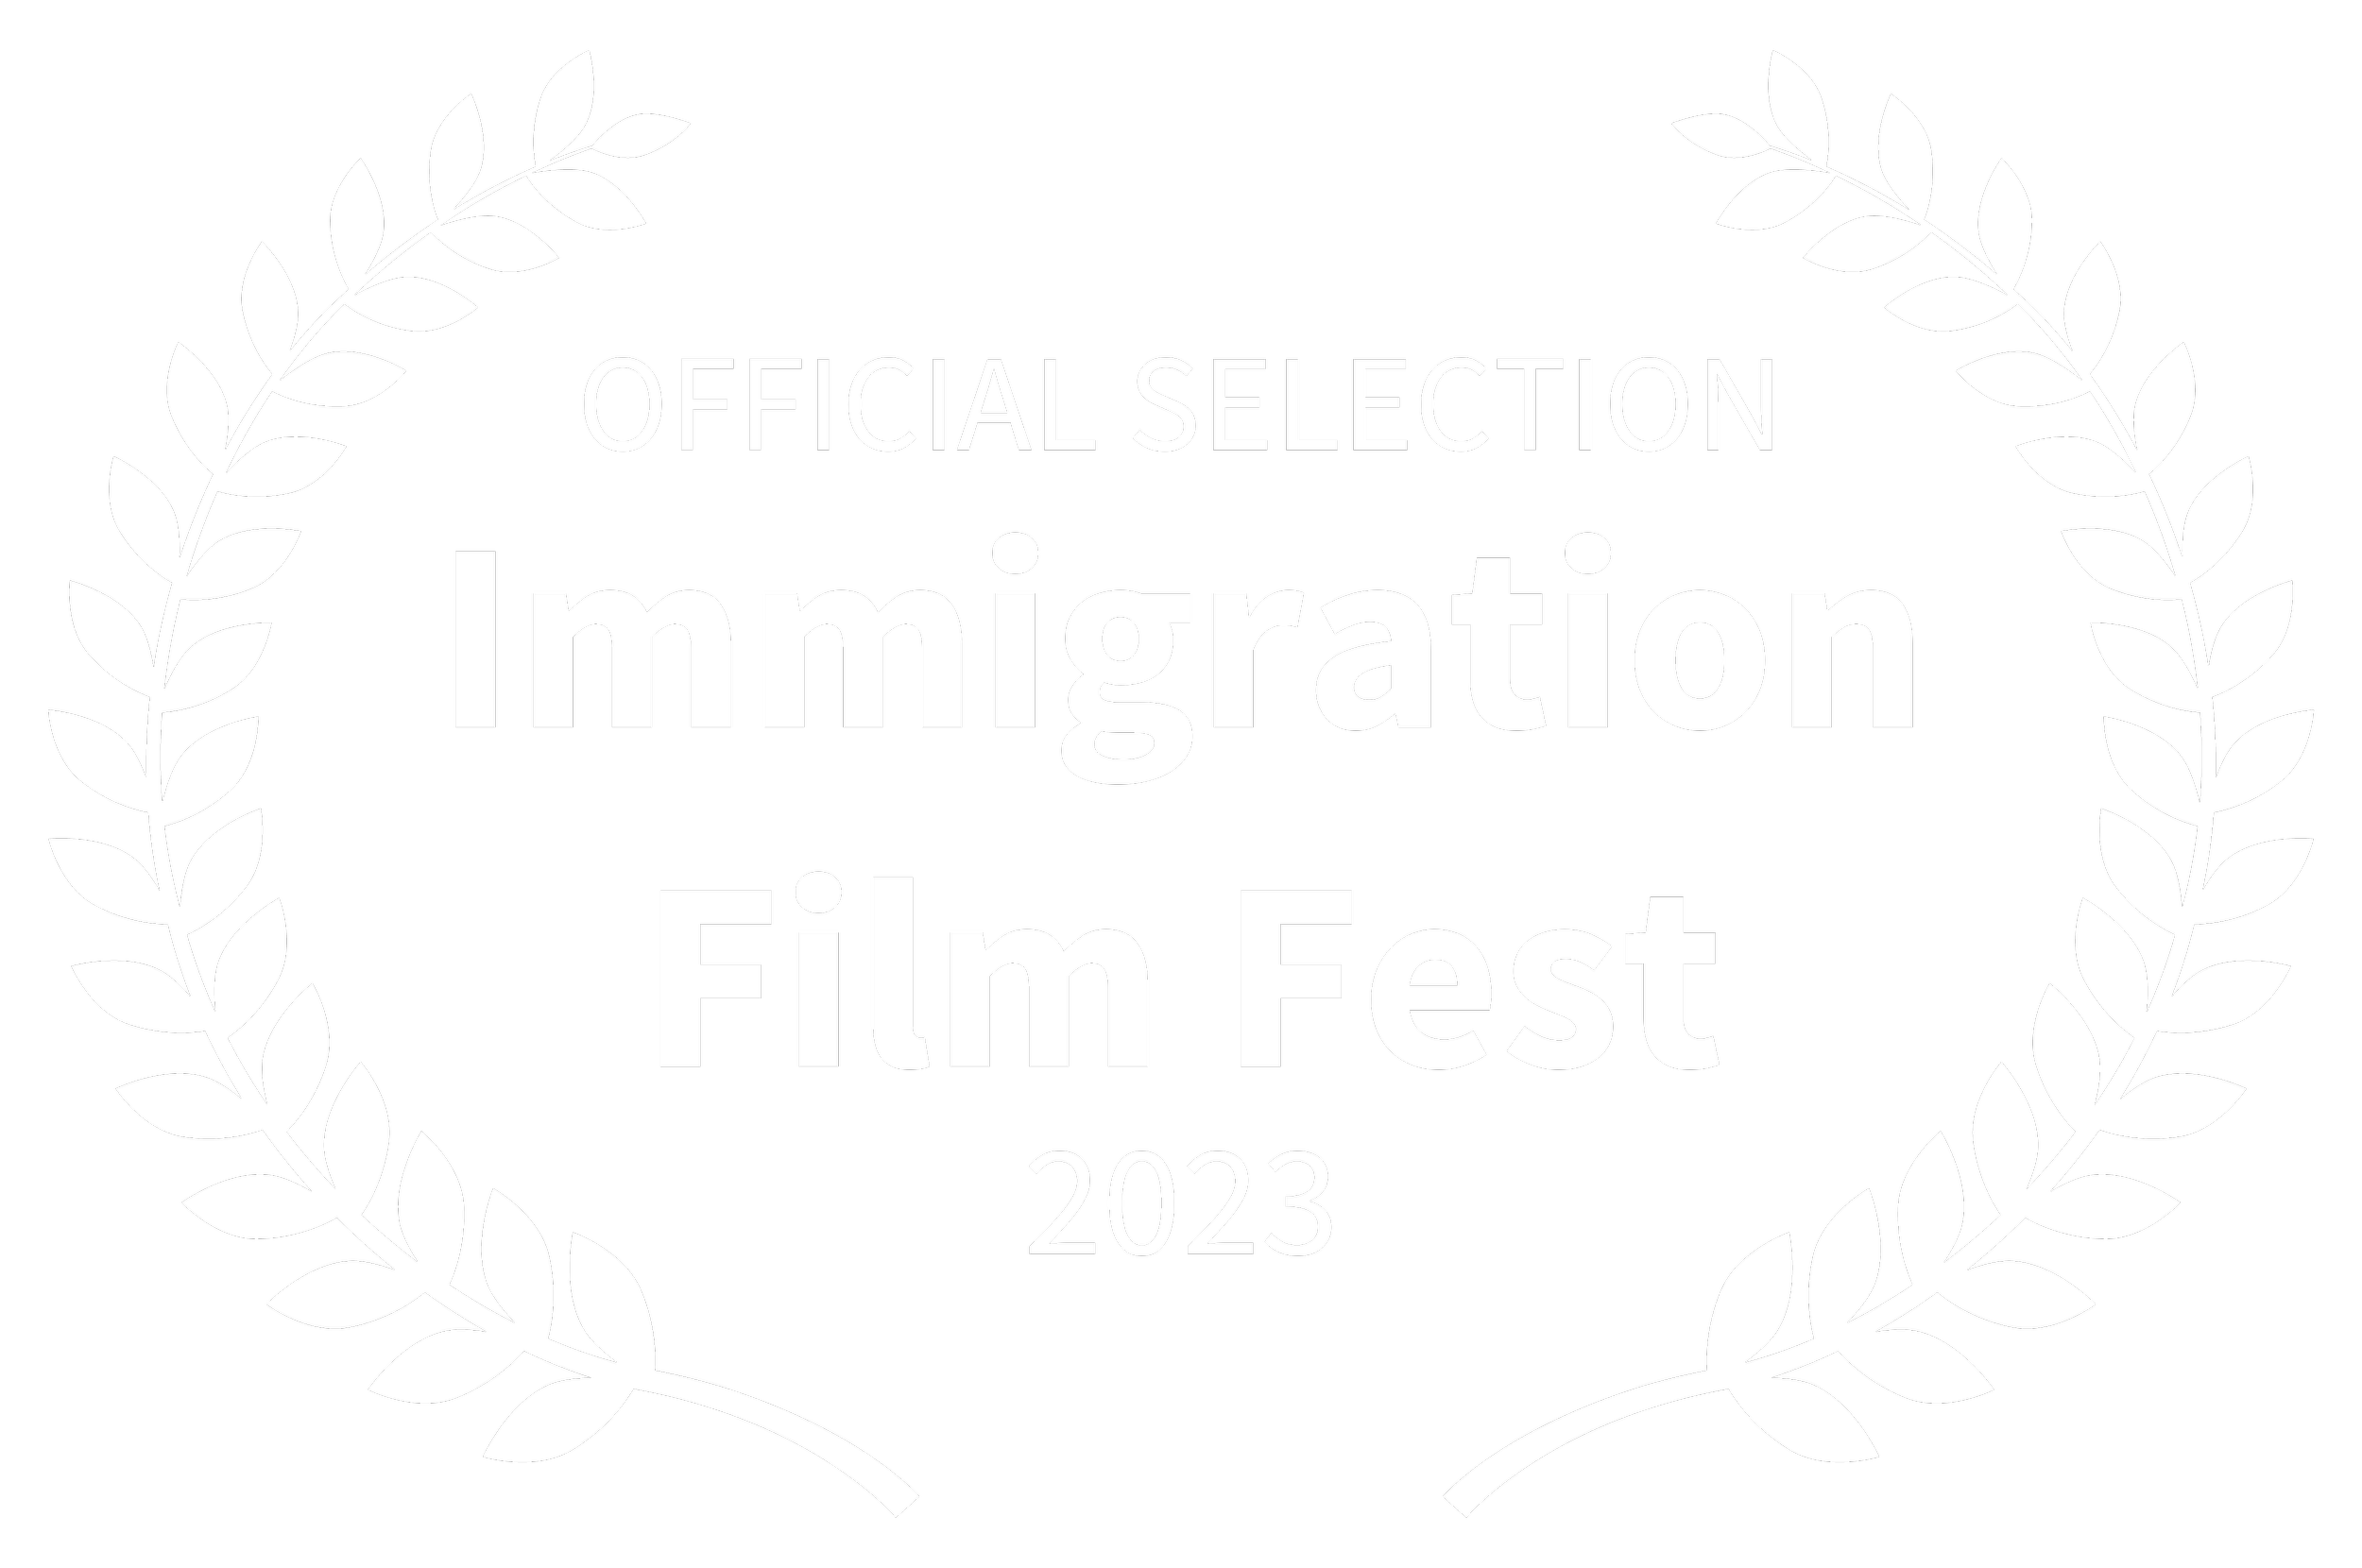 OFFICIALSELECTION-ImmigrationFilmFest-2023_.png